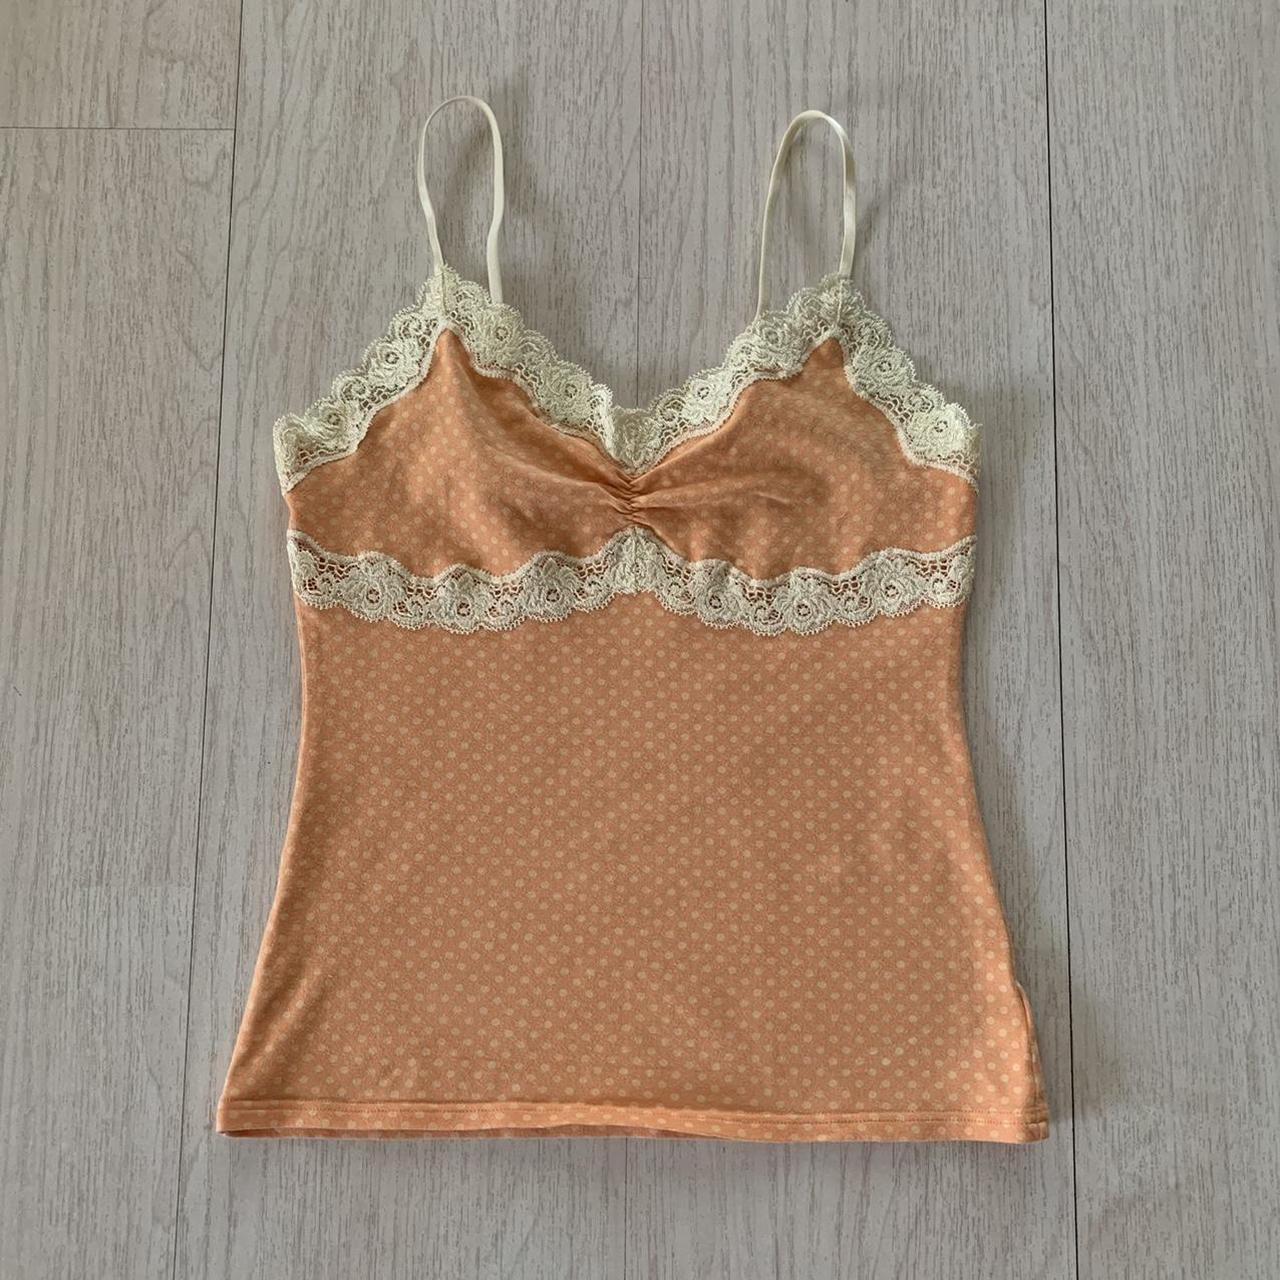 Early 2000s y2k pretty lace trimmed cotton camisole... - Depop